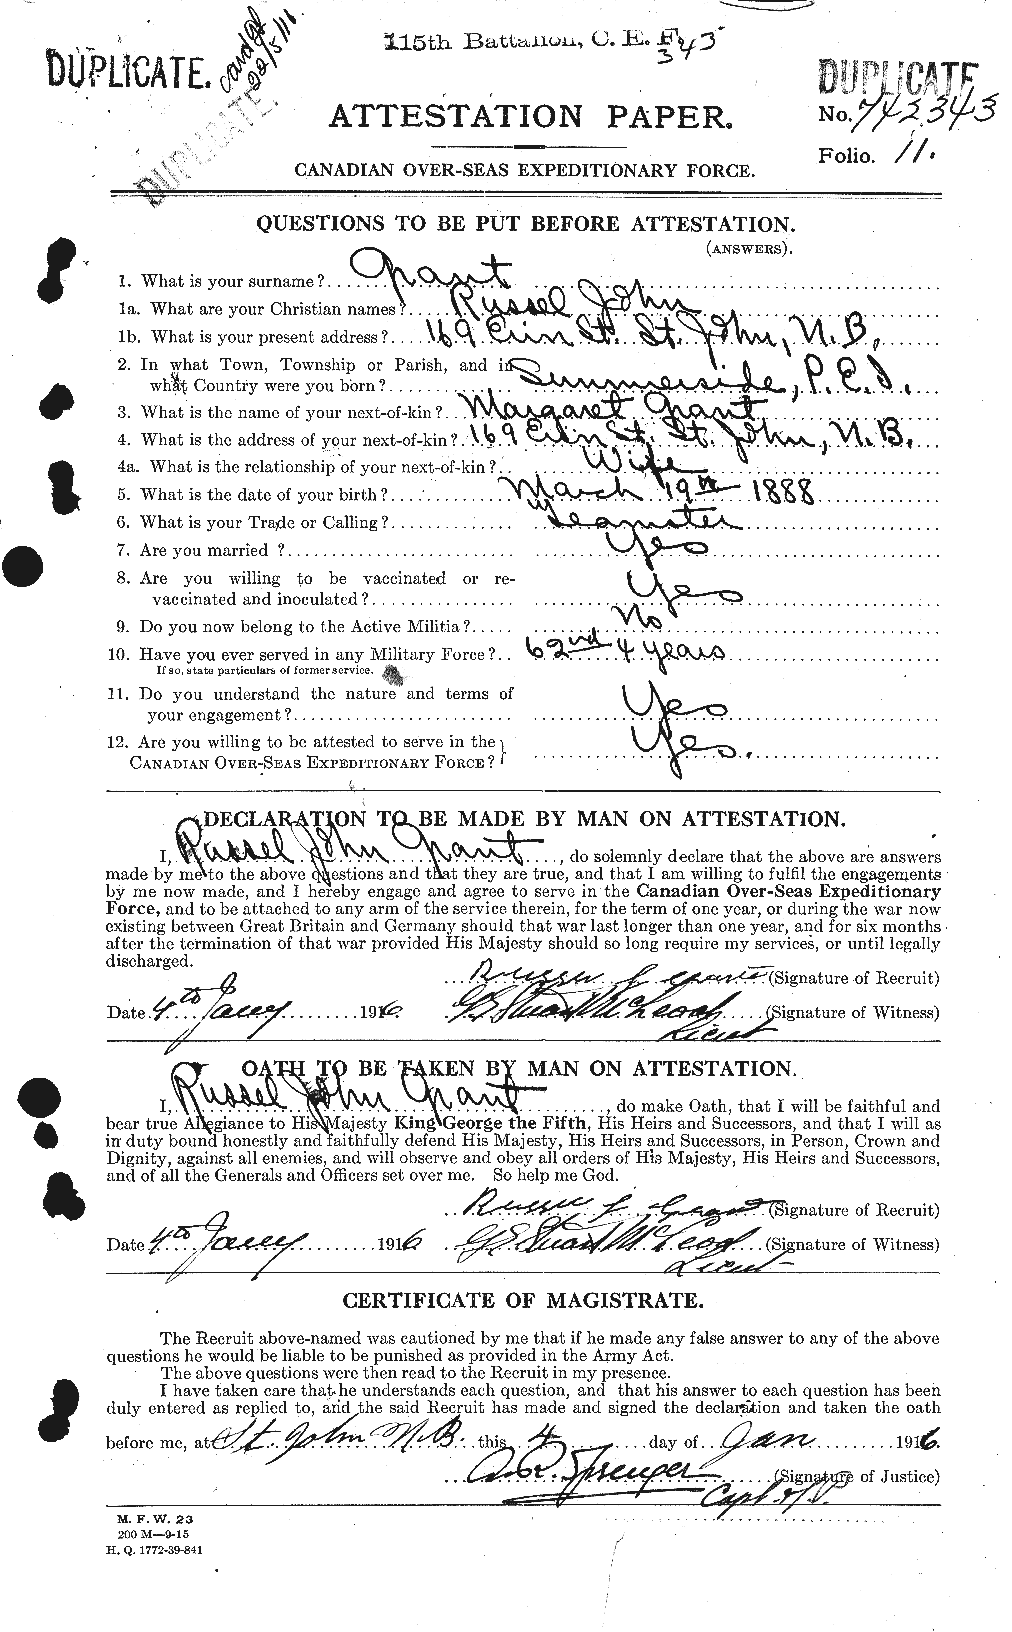 Personnel Records of the First World War - CEF 361126a